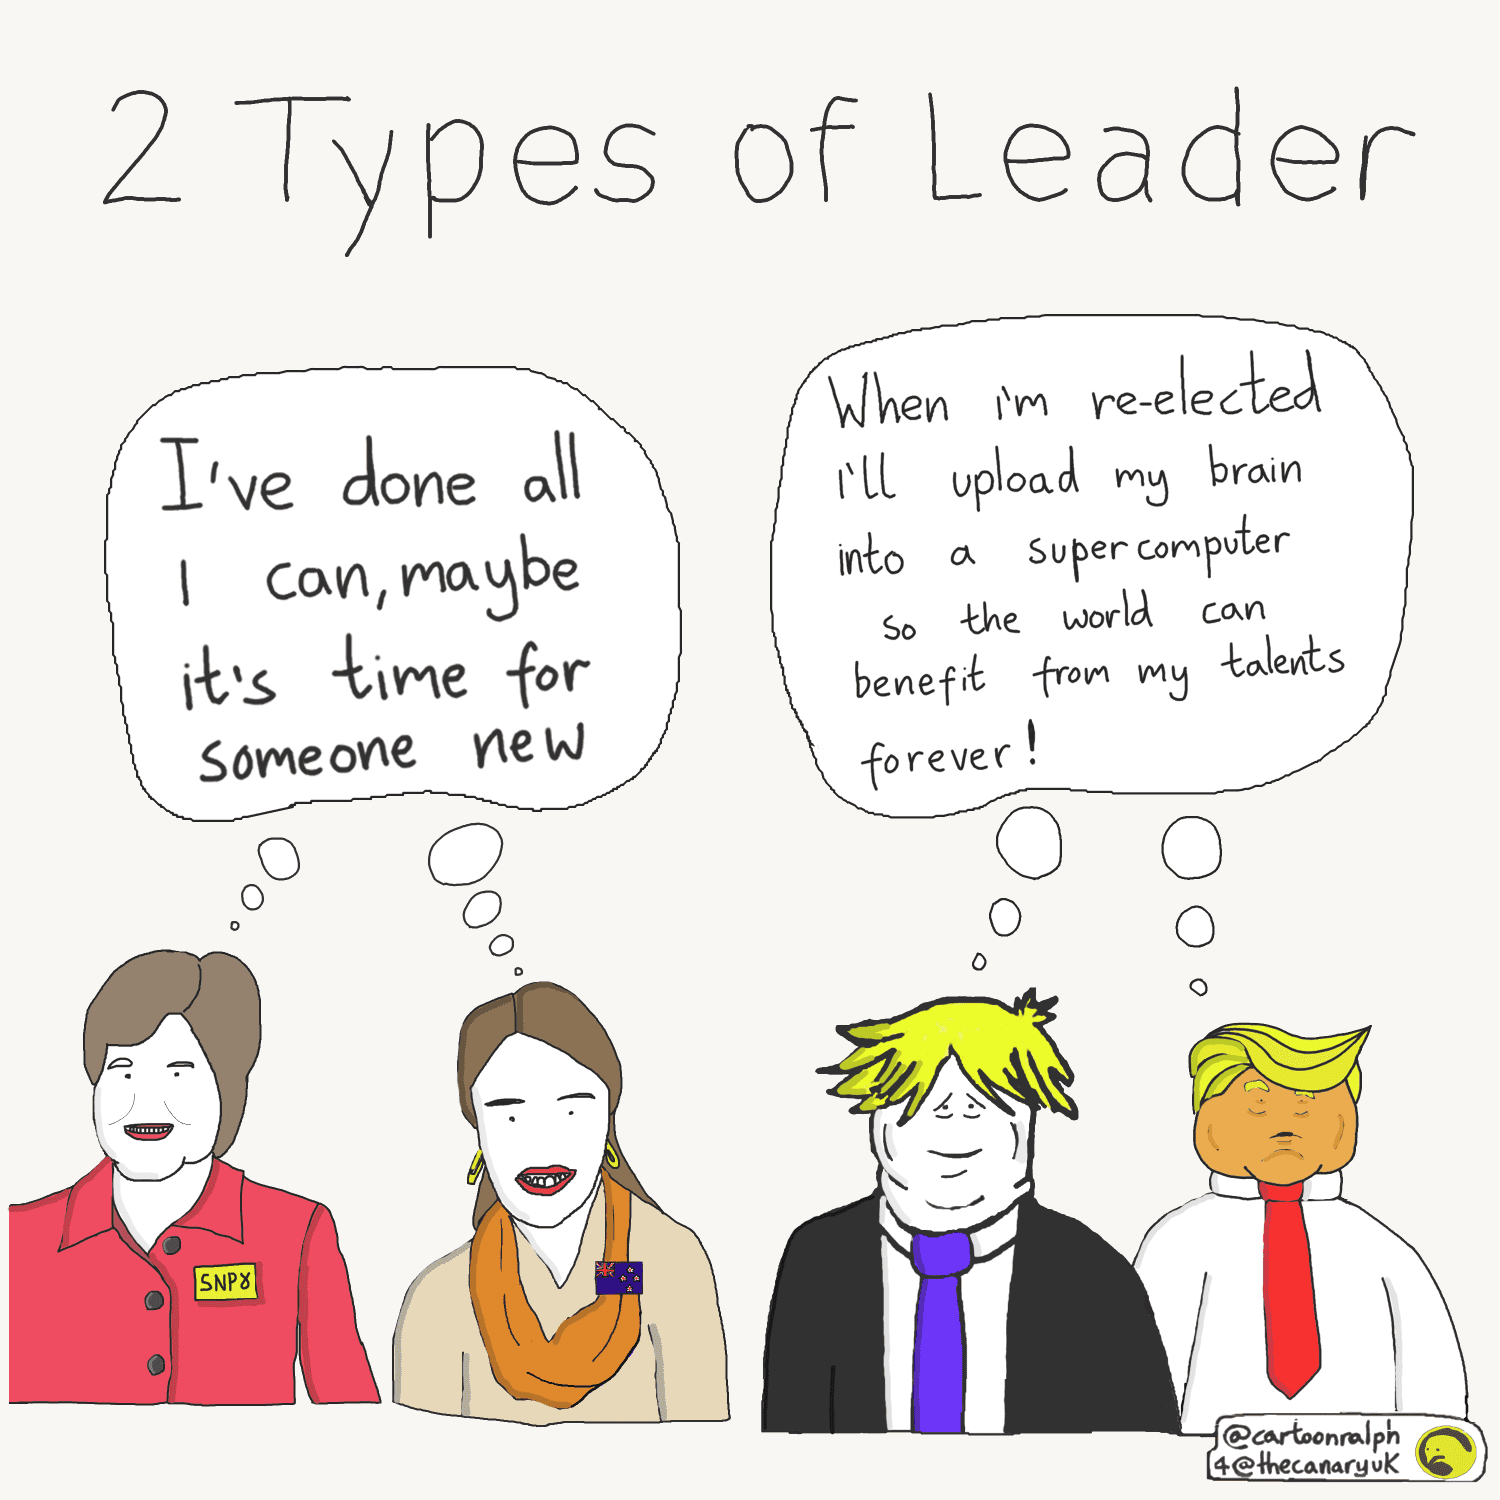 A cartoon with the title "Two types of leader". On the left are Nicola Sturgeon and Jacinda Ardern, with a speech bubble saying "I've done all I can, maybe it's time for someone new". On the right are Boris Johnson and Donald Trump, with a speech bubble saying: "When I'm re-elected I'll upload my brain into a supercomputer so the world can benefit from my talents forever!"